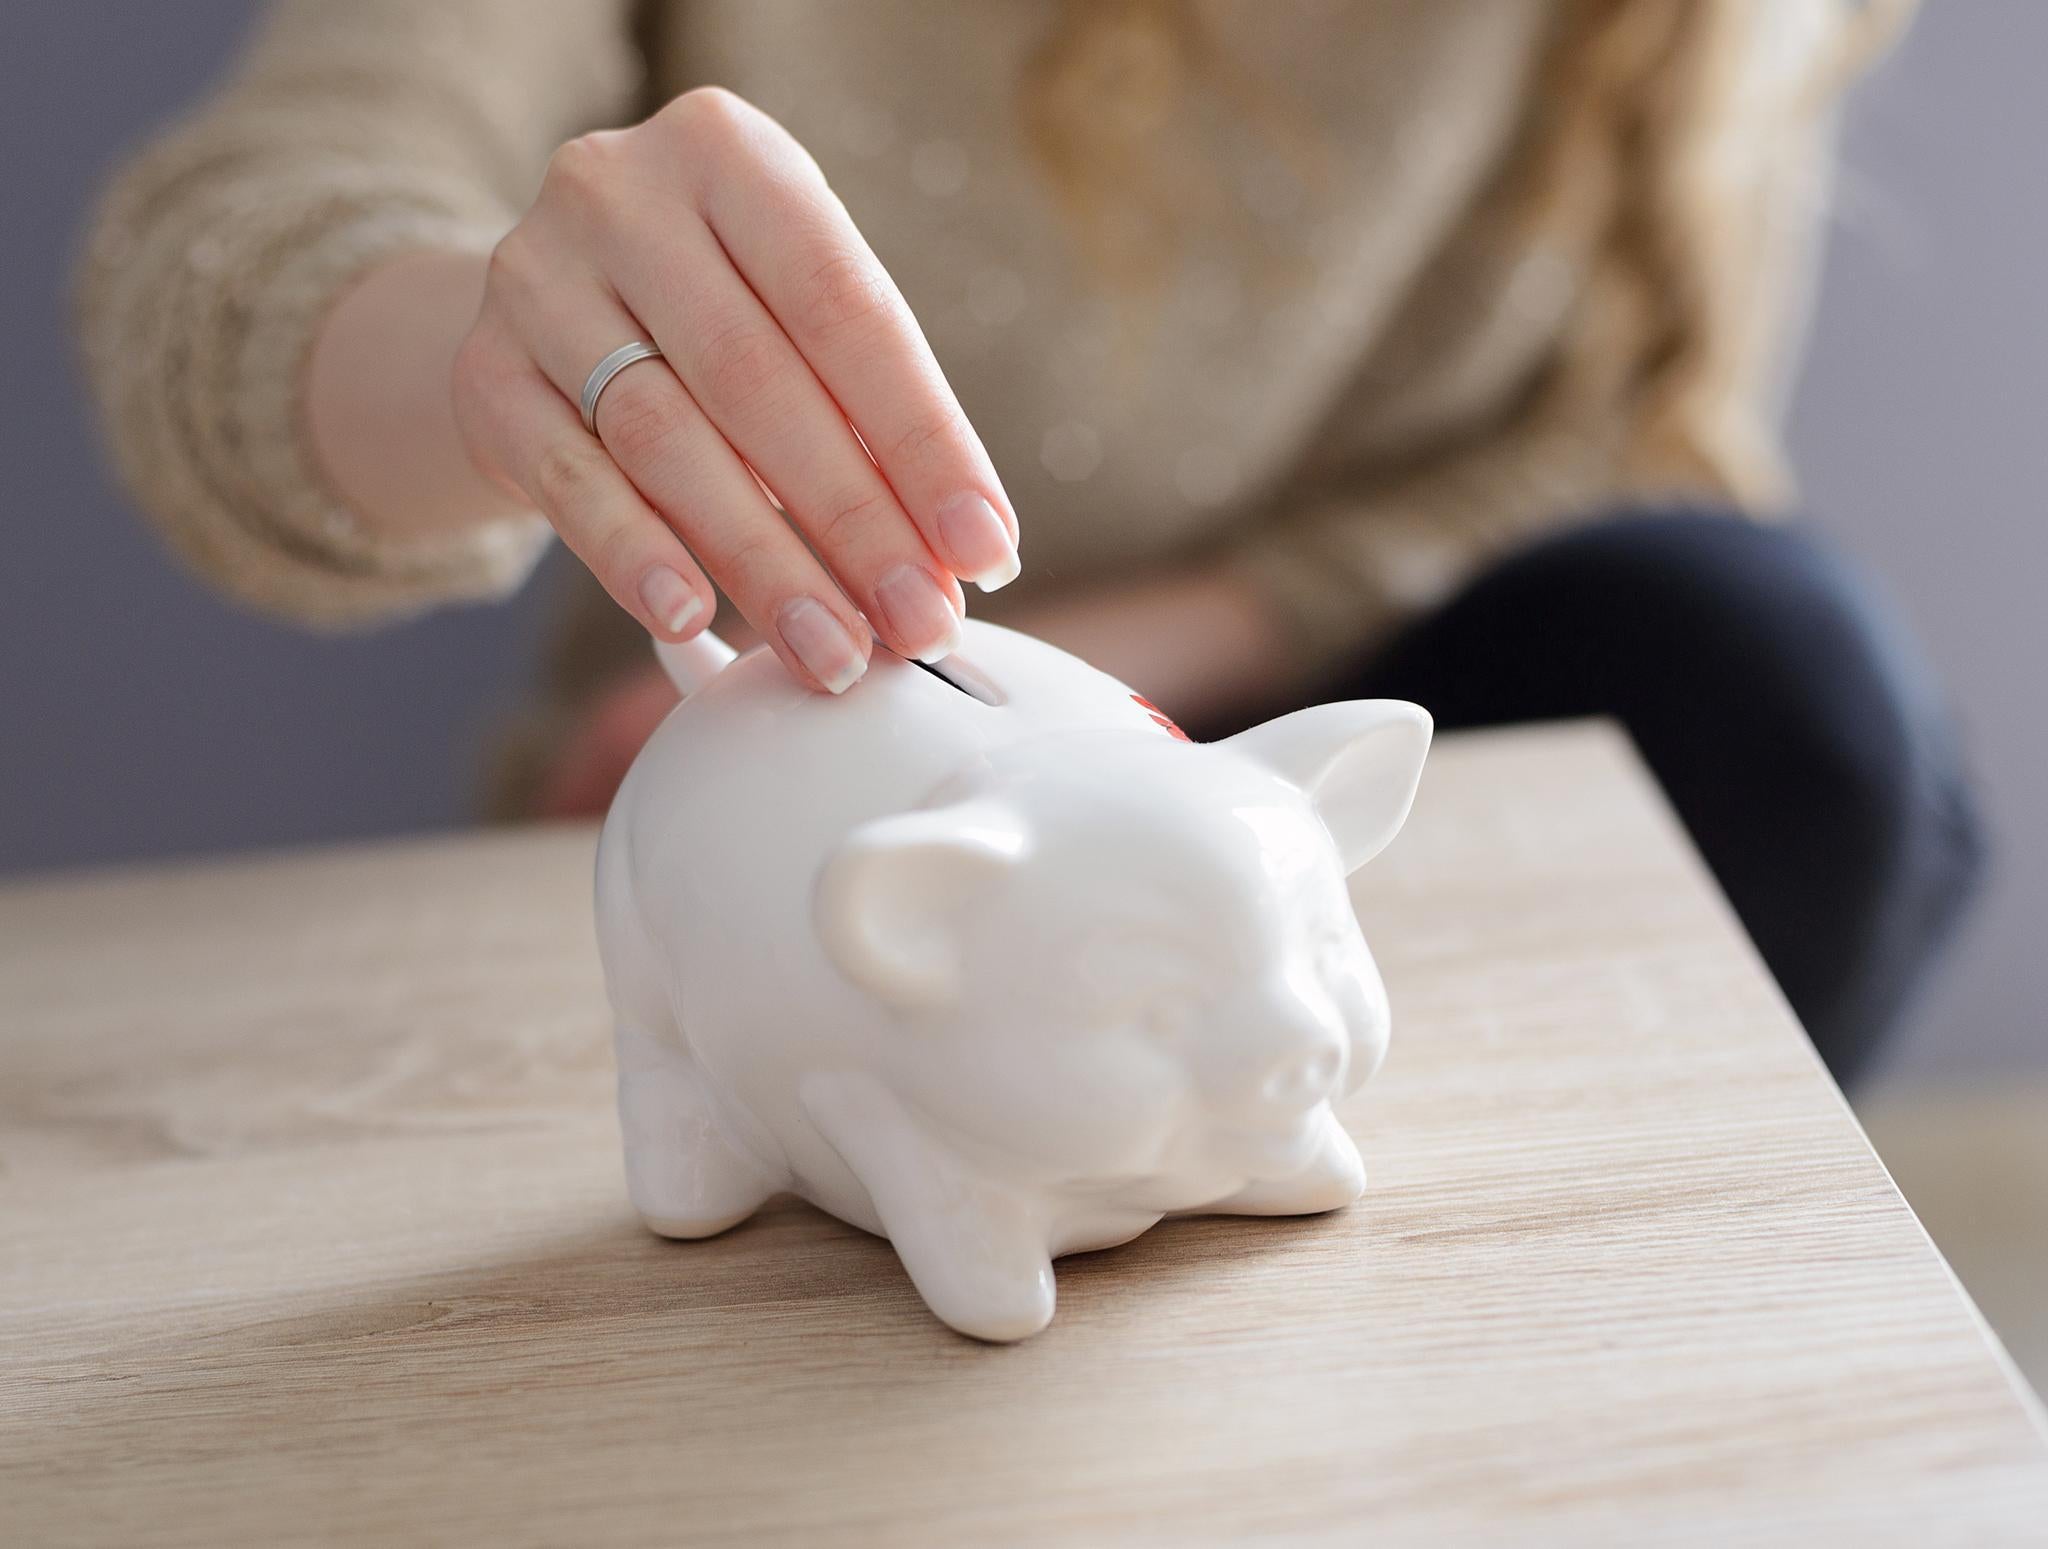 A piggy bank might serve you better than dealing with one of Britain's financial institutions